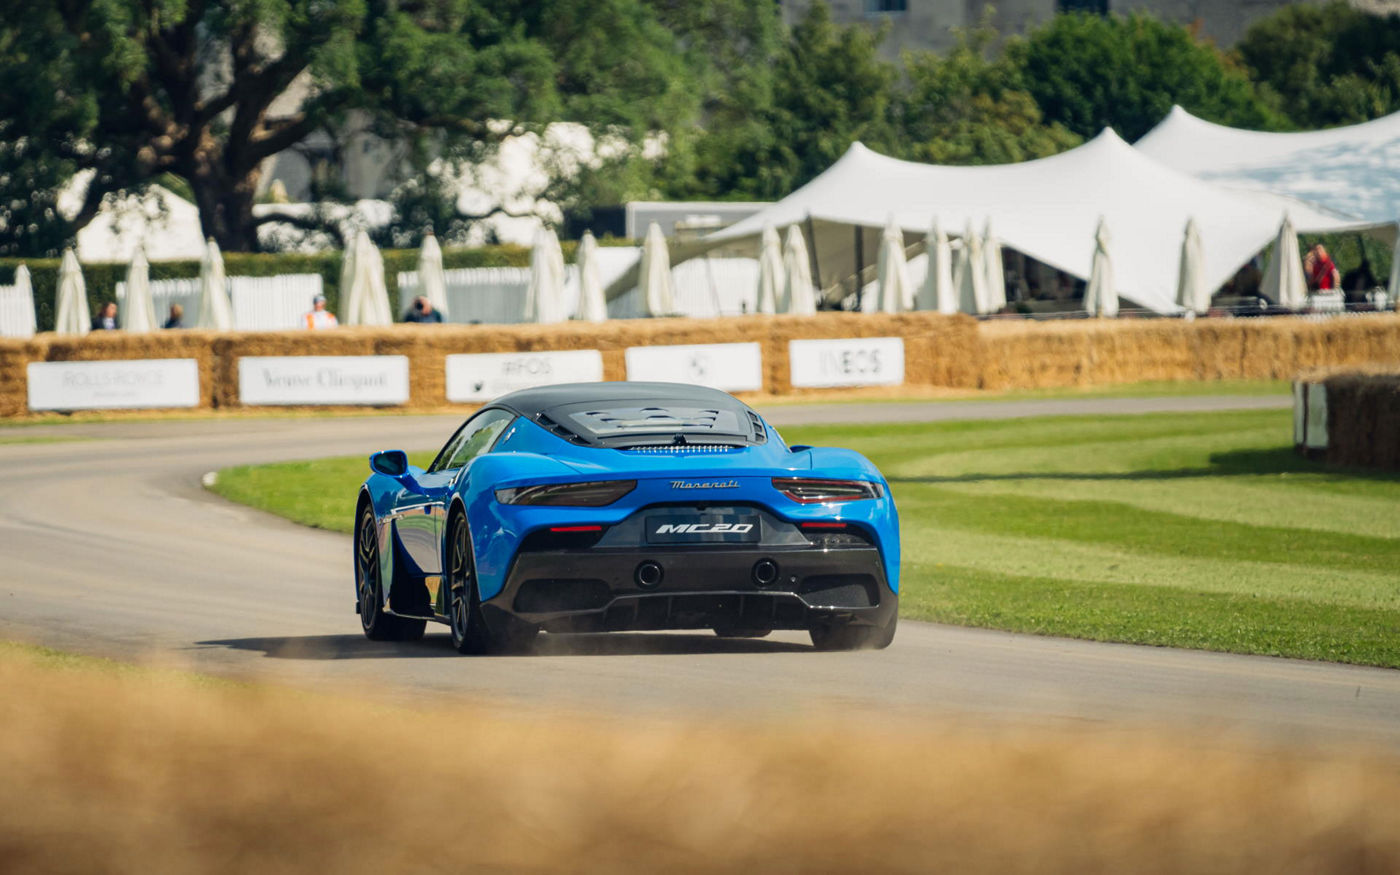 Maserati MC20 driven on the track at the 2022 Goodwood Festival of Speed